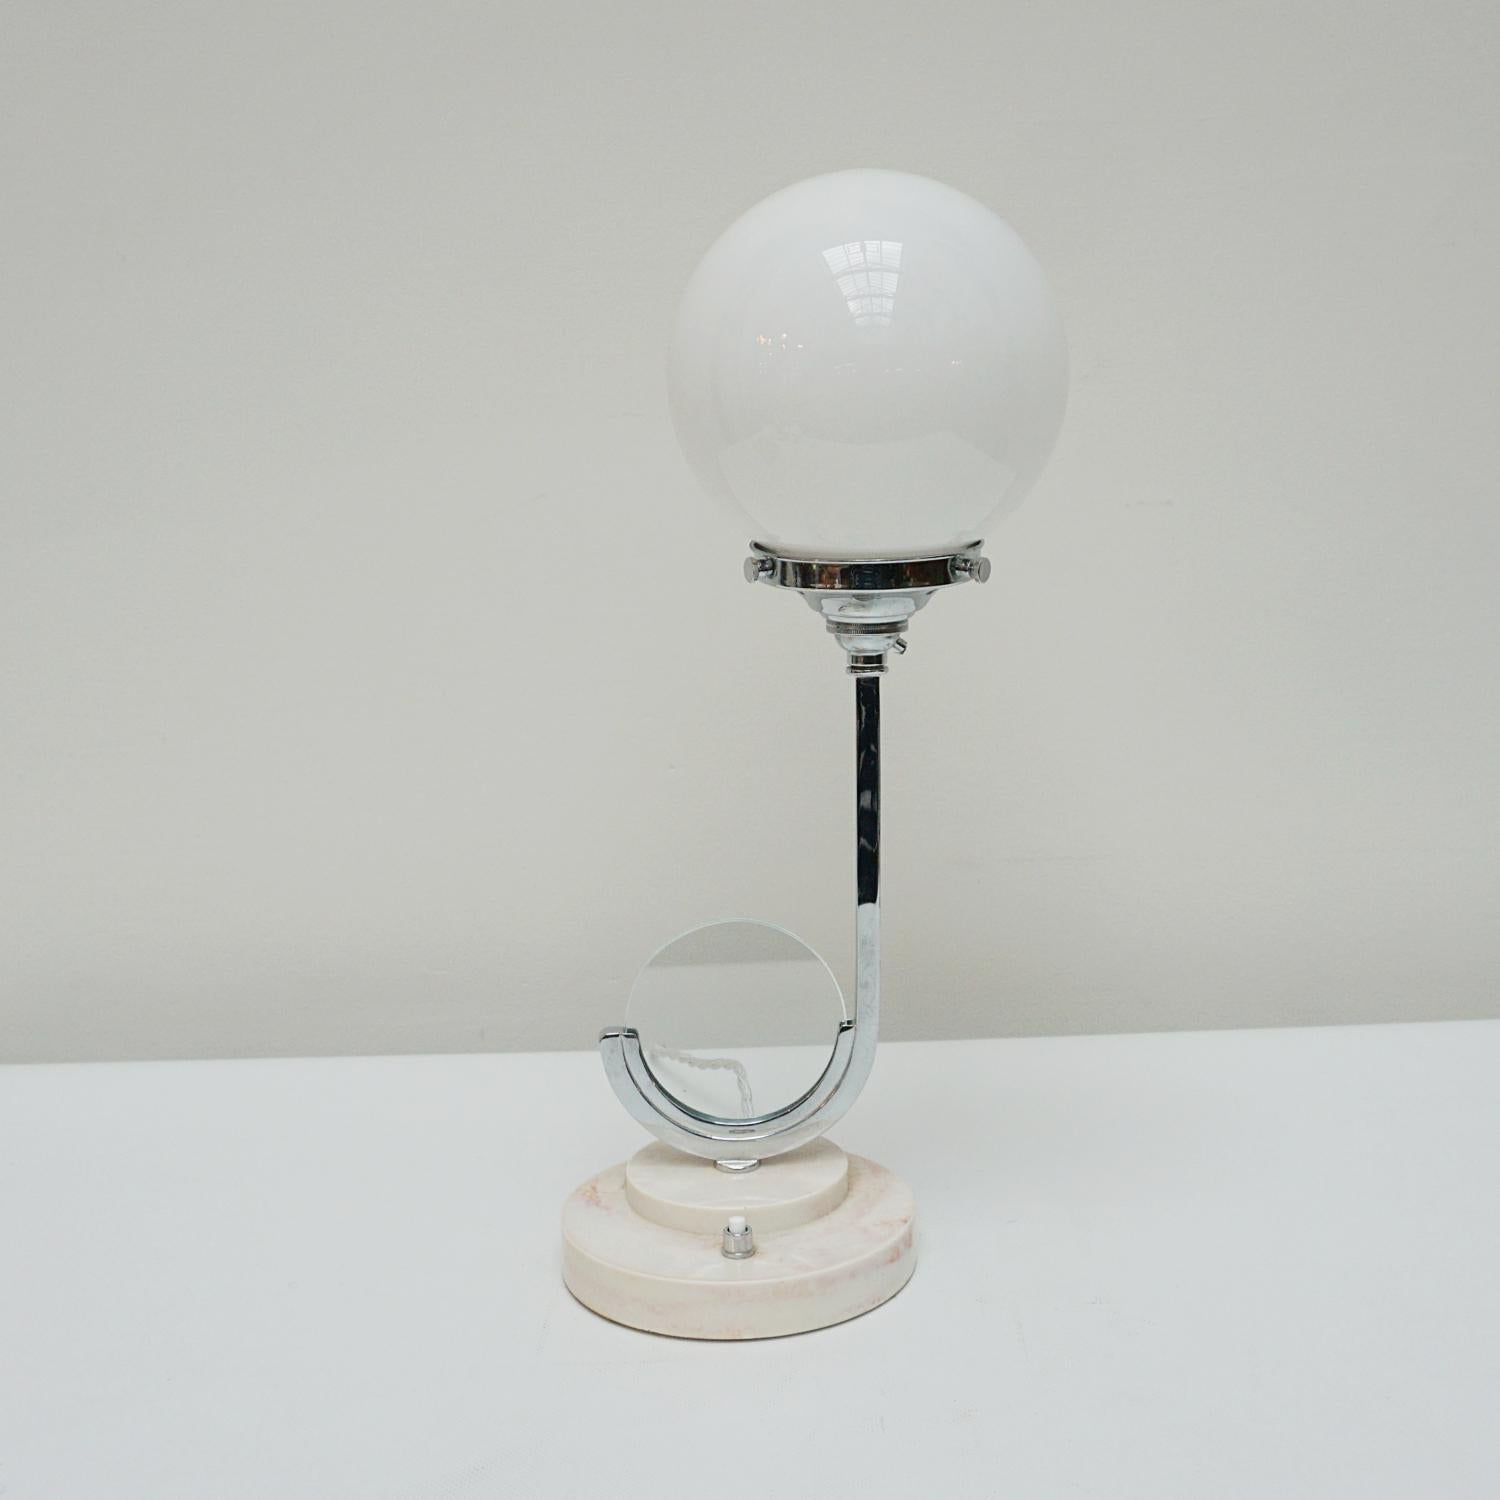 An original Art Deco table lamp. Curved chromed stem with white globe glass shade. Circular stepped marble based with circular glass picture holder at the base.

Dimensions: 42cm W 14cm 

Origin: English

Item Number: J311

All of our lighting is